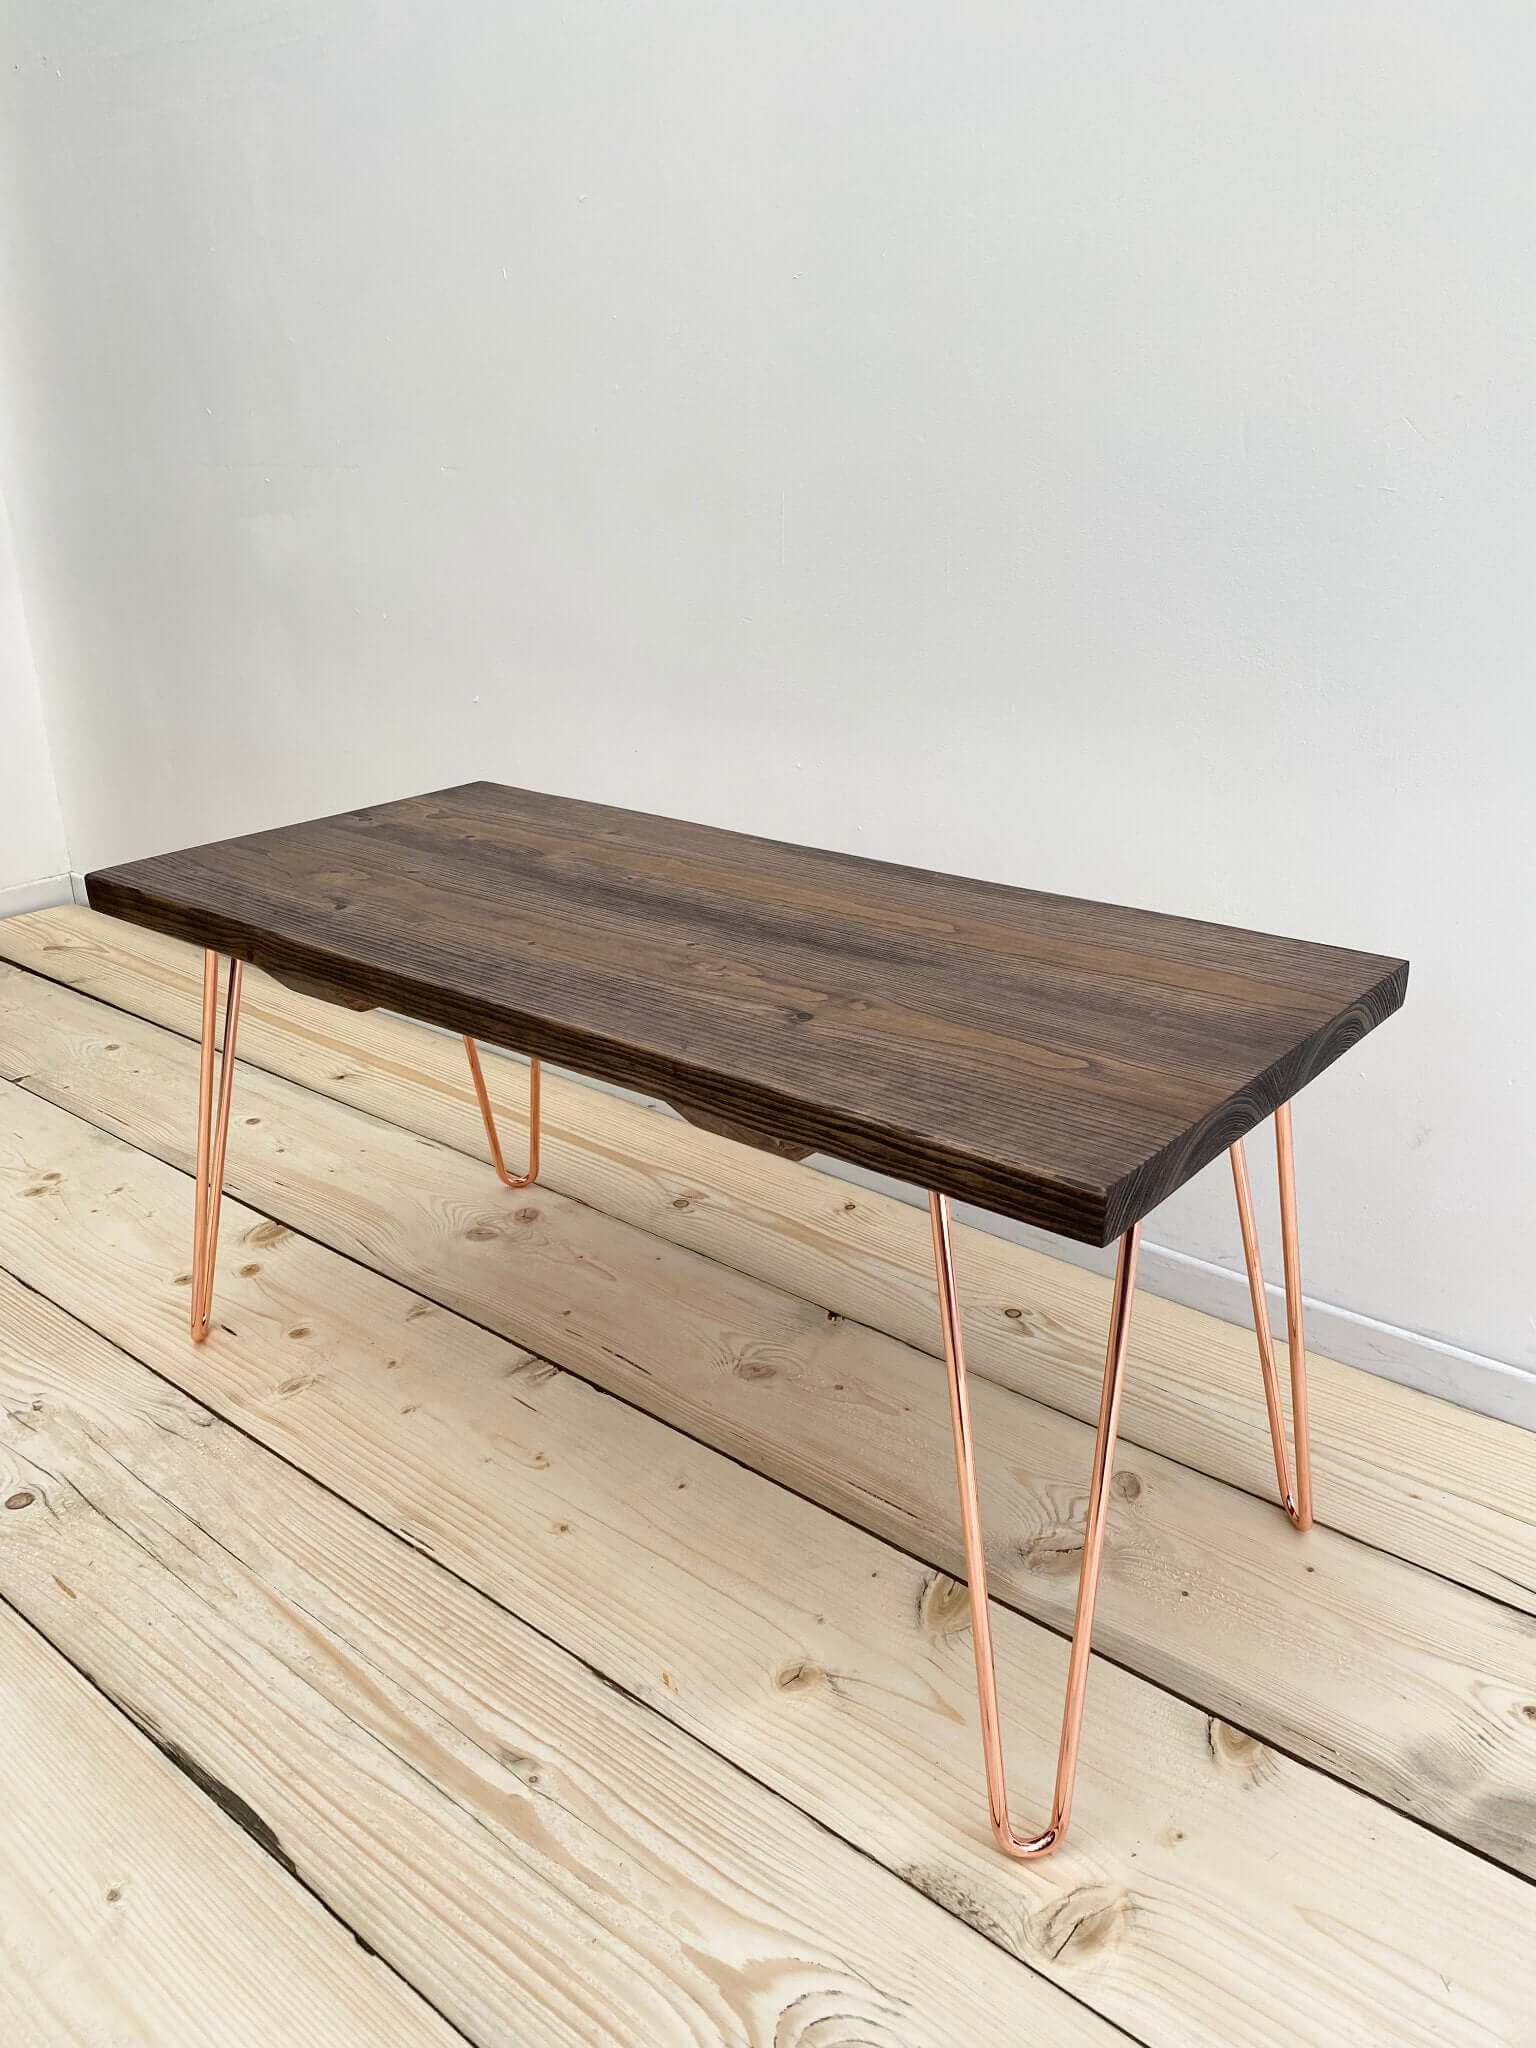 Reclaimed wood coffee table with hairpin legs.